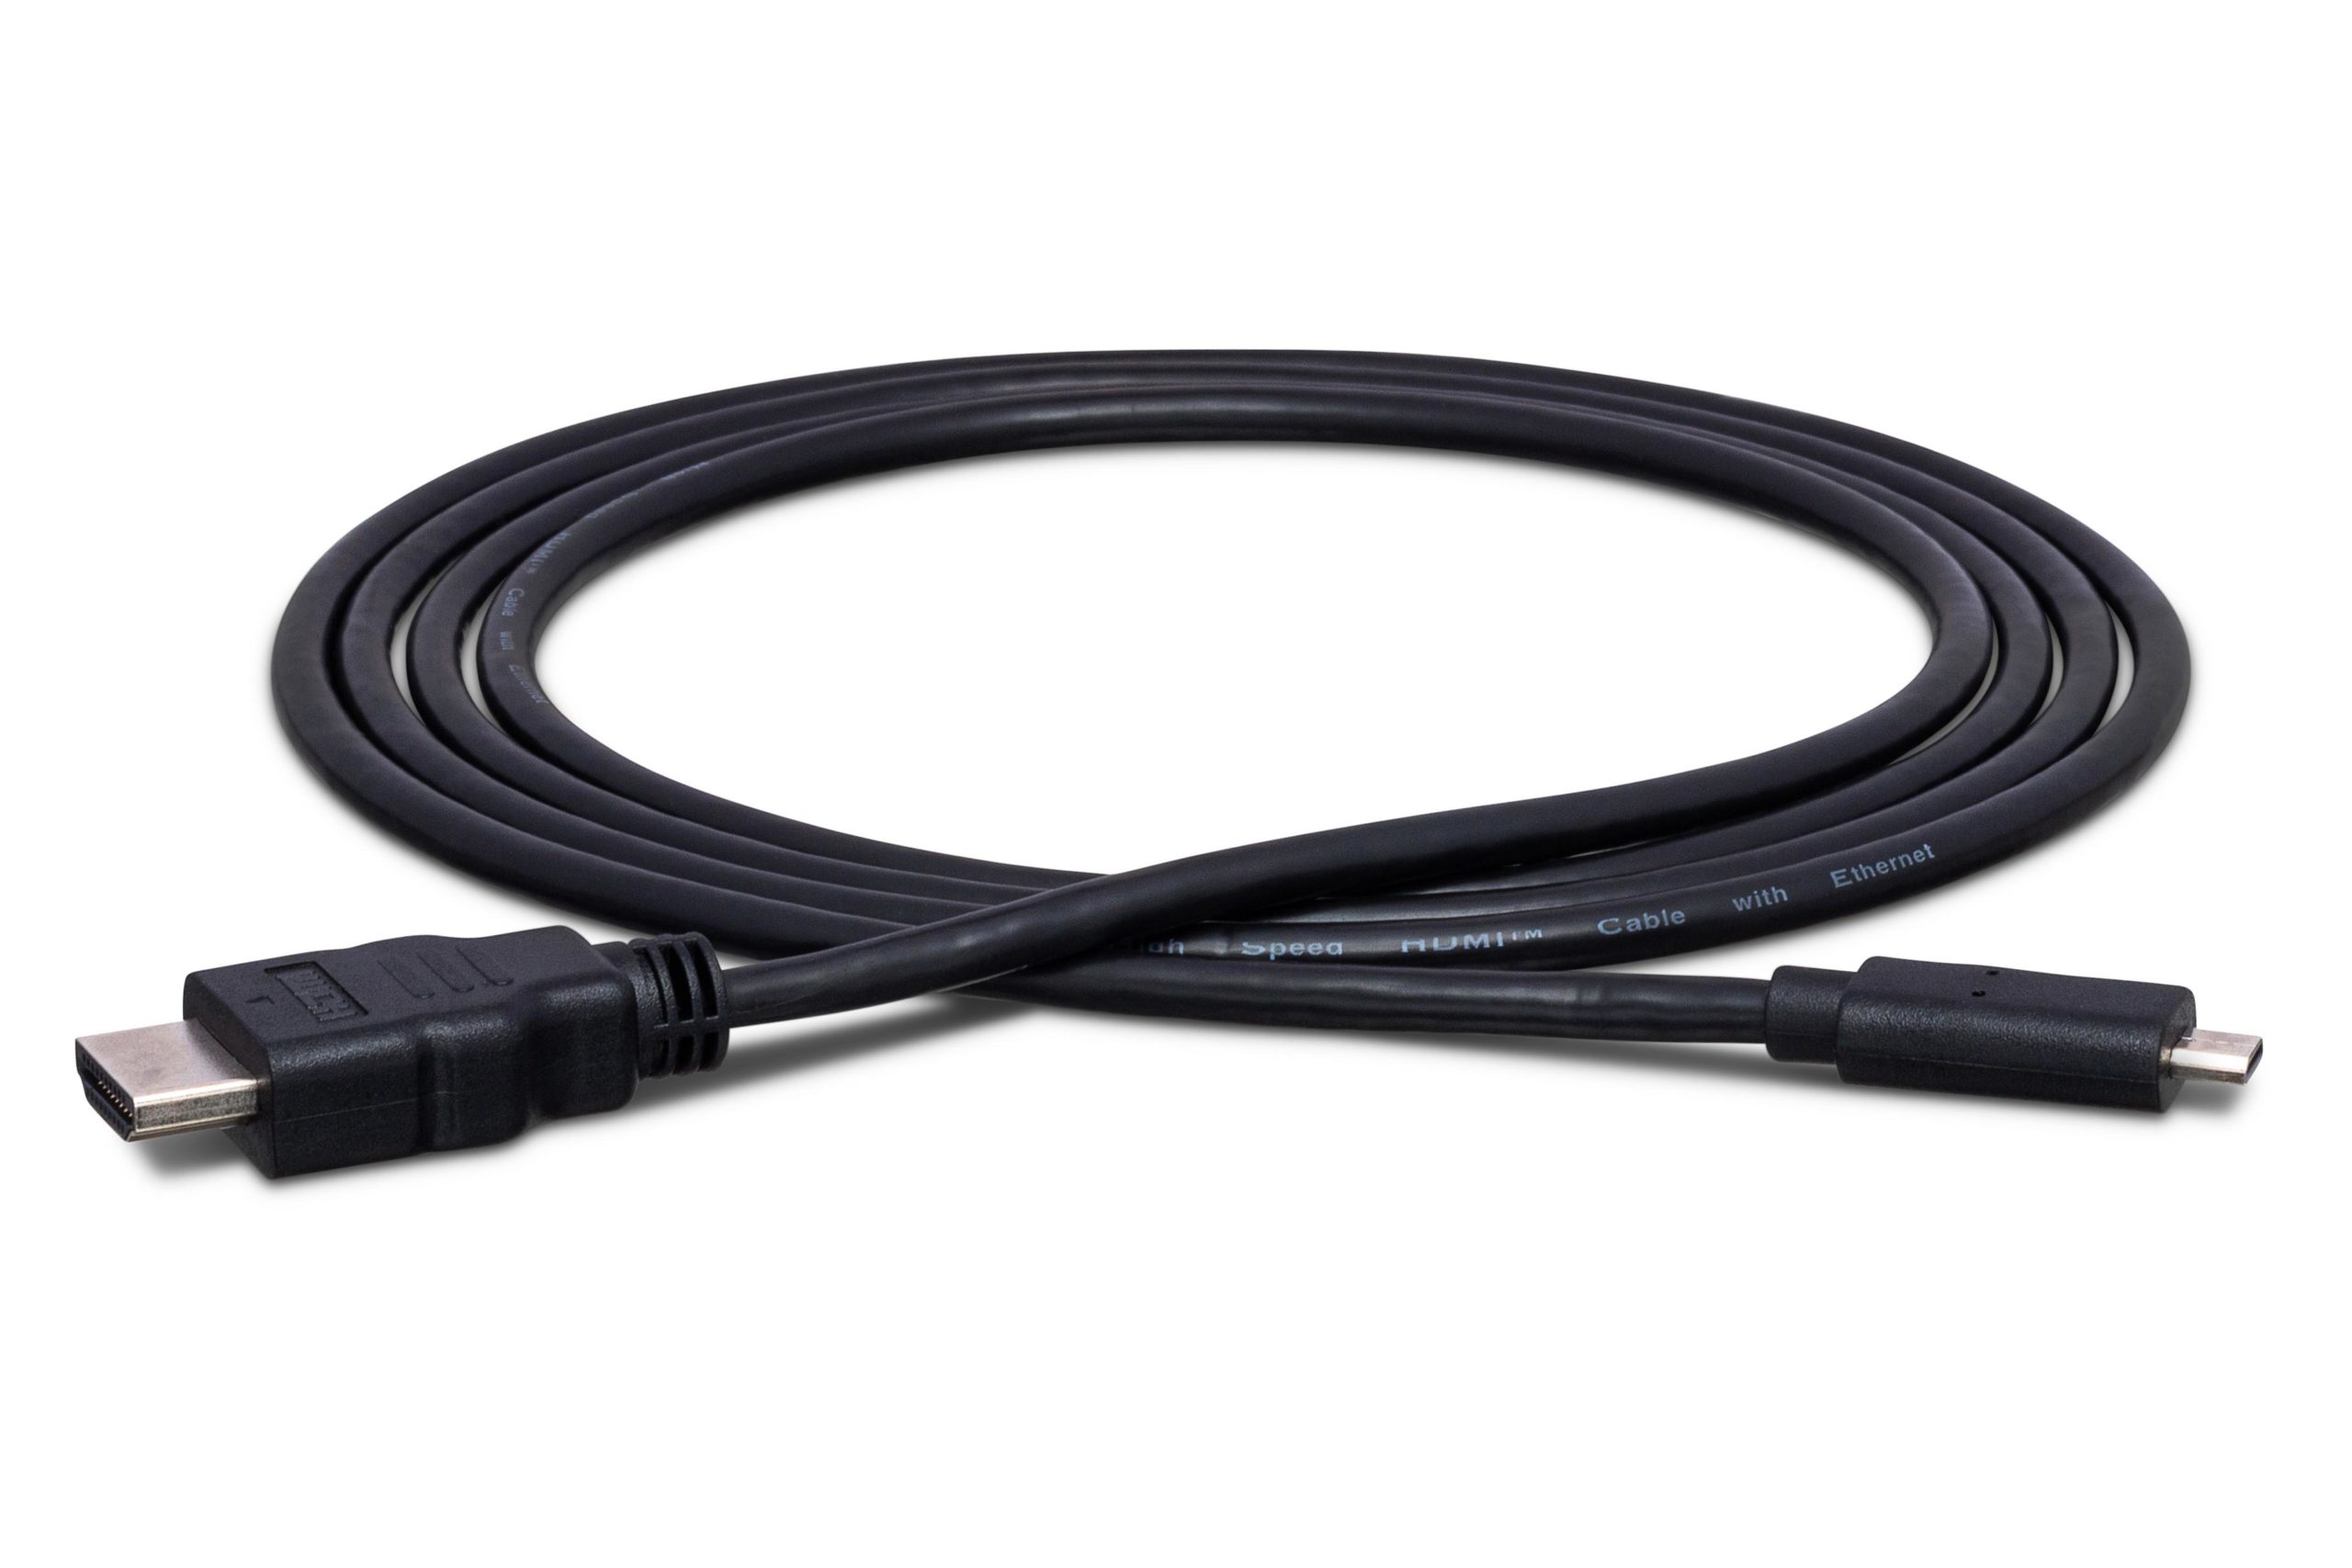 High Speed HDMI Cable with Ethernet - HDMI Cables